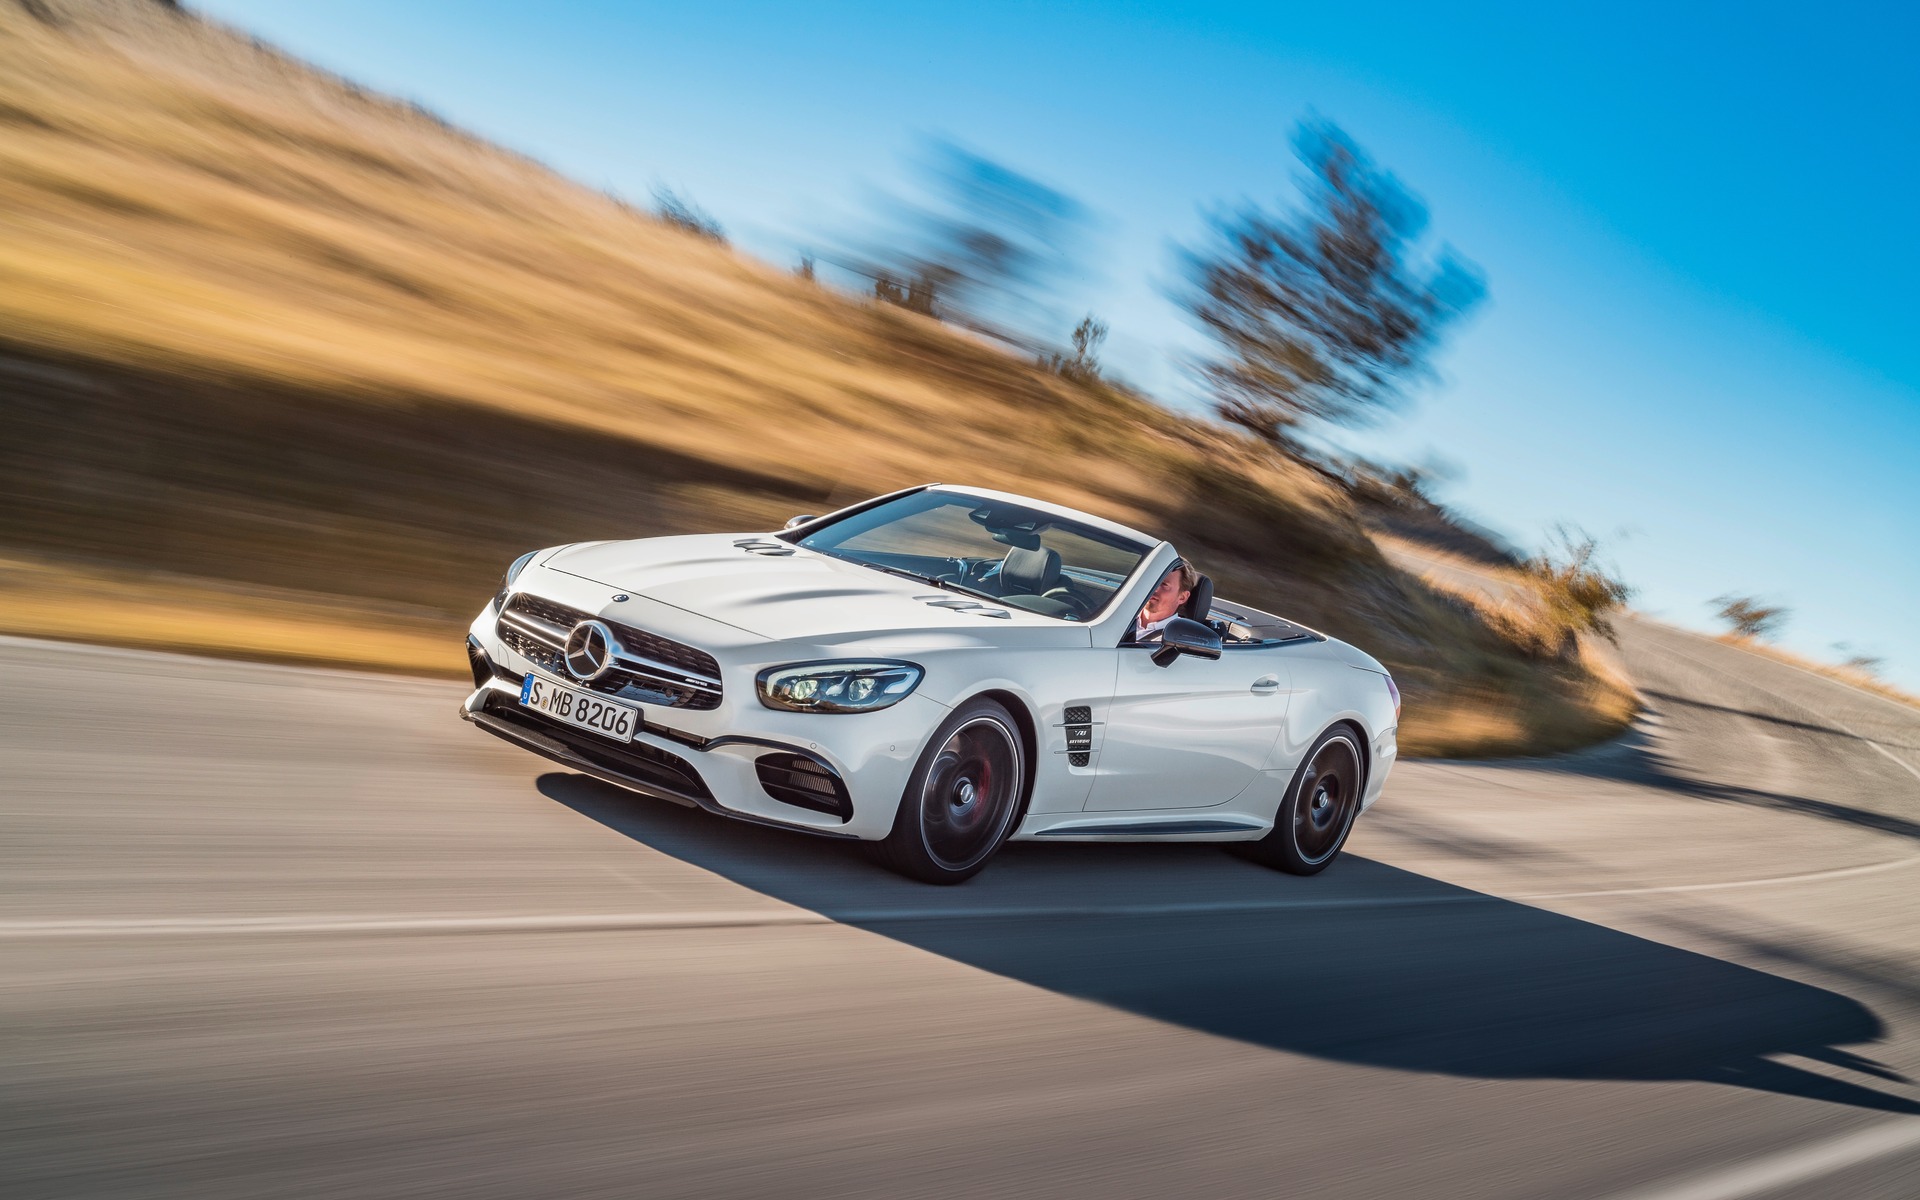 2017 Mercedes-AMG SL 63 - Topless driving pleasure and a 577-hp engine